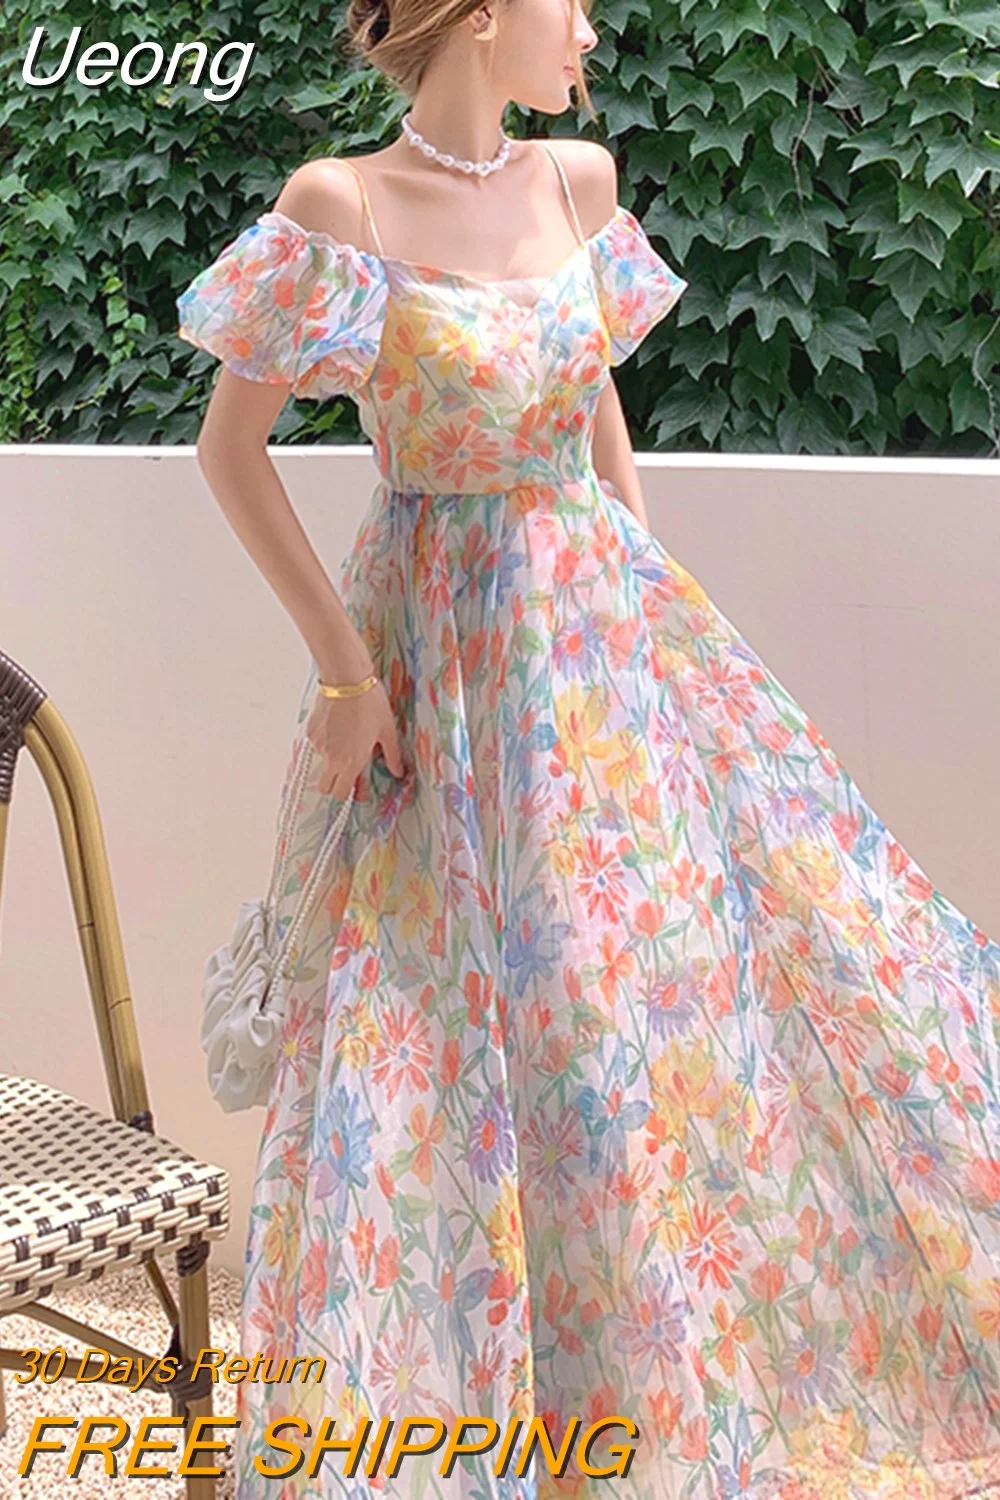 Ueong Women Birthday Dress Sheer Casual Sexy Floral Strap Backless Bandage Maxi Party Vacation Lady Robe Femme Mujer Vestidos